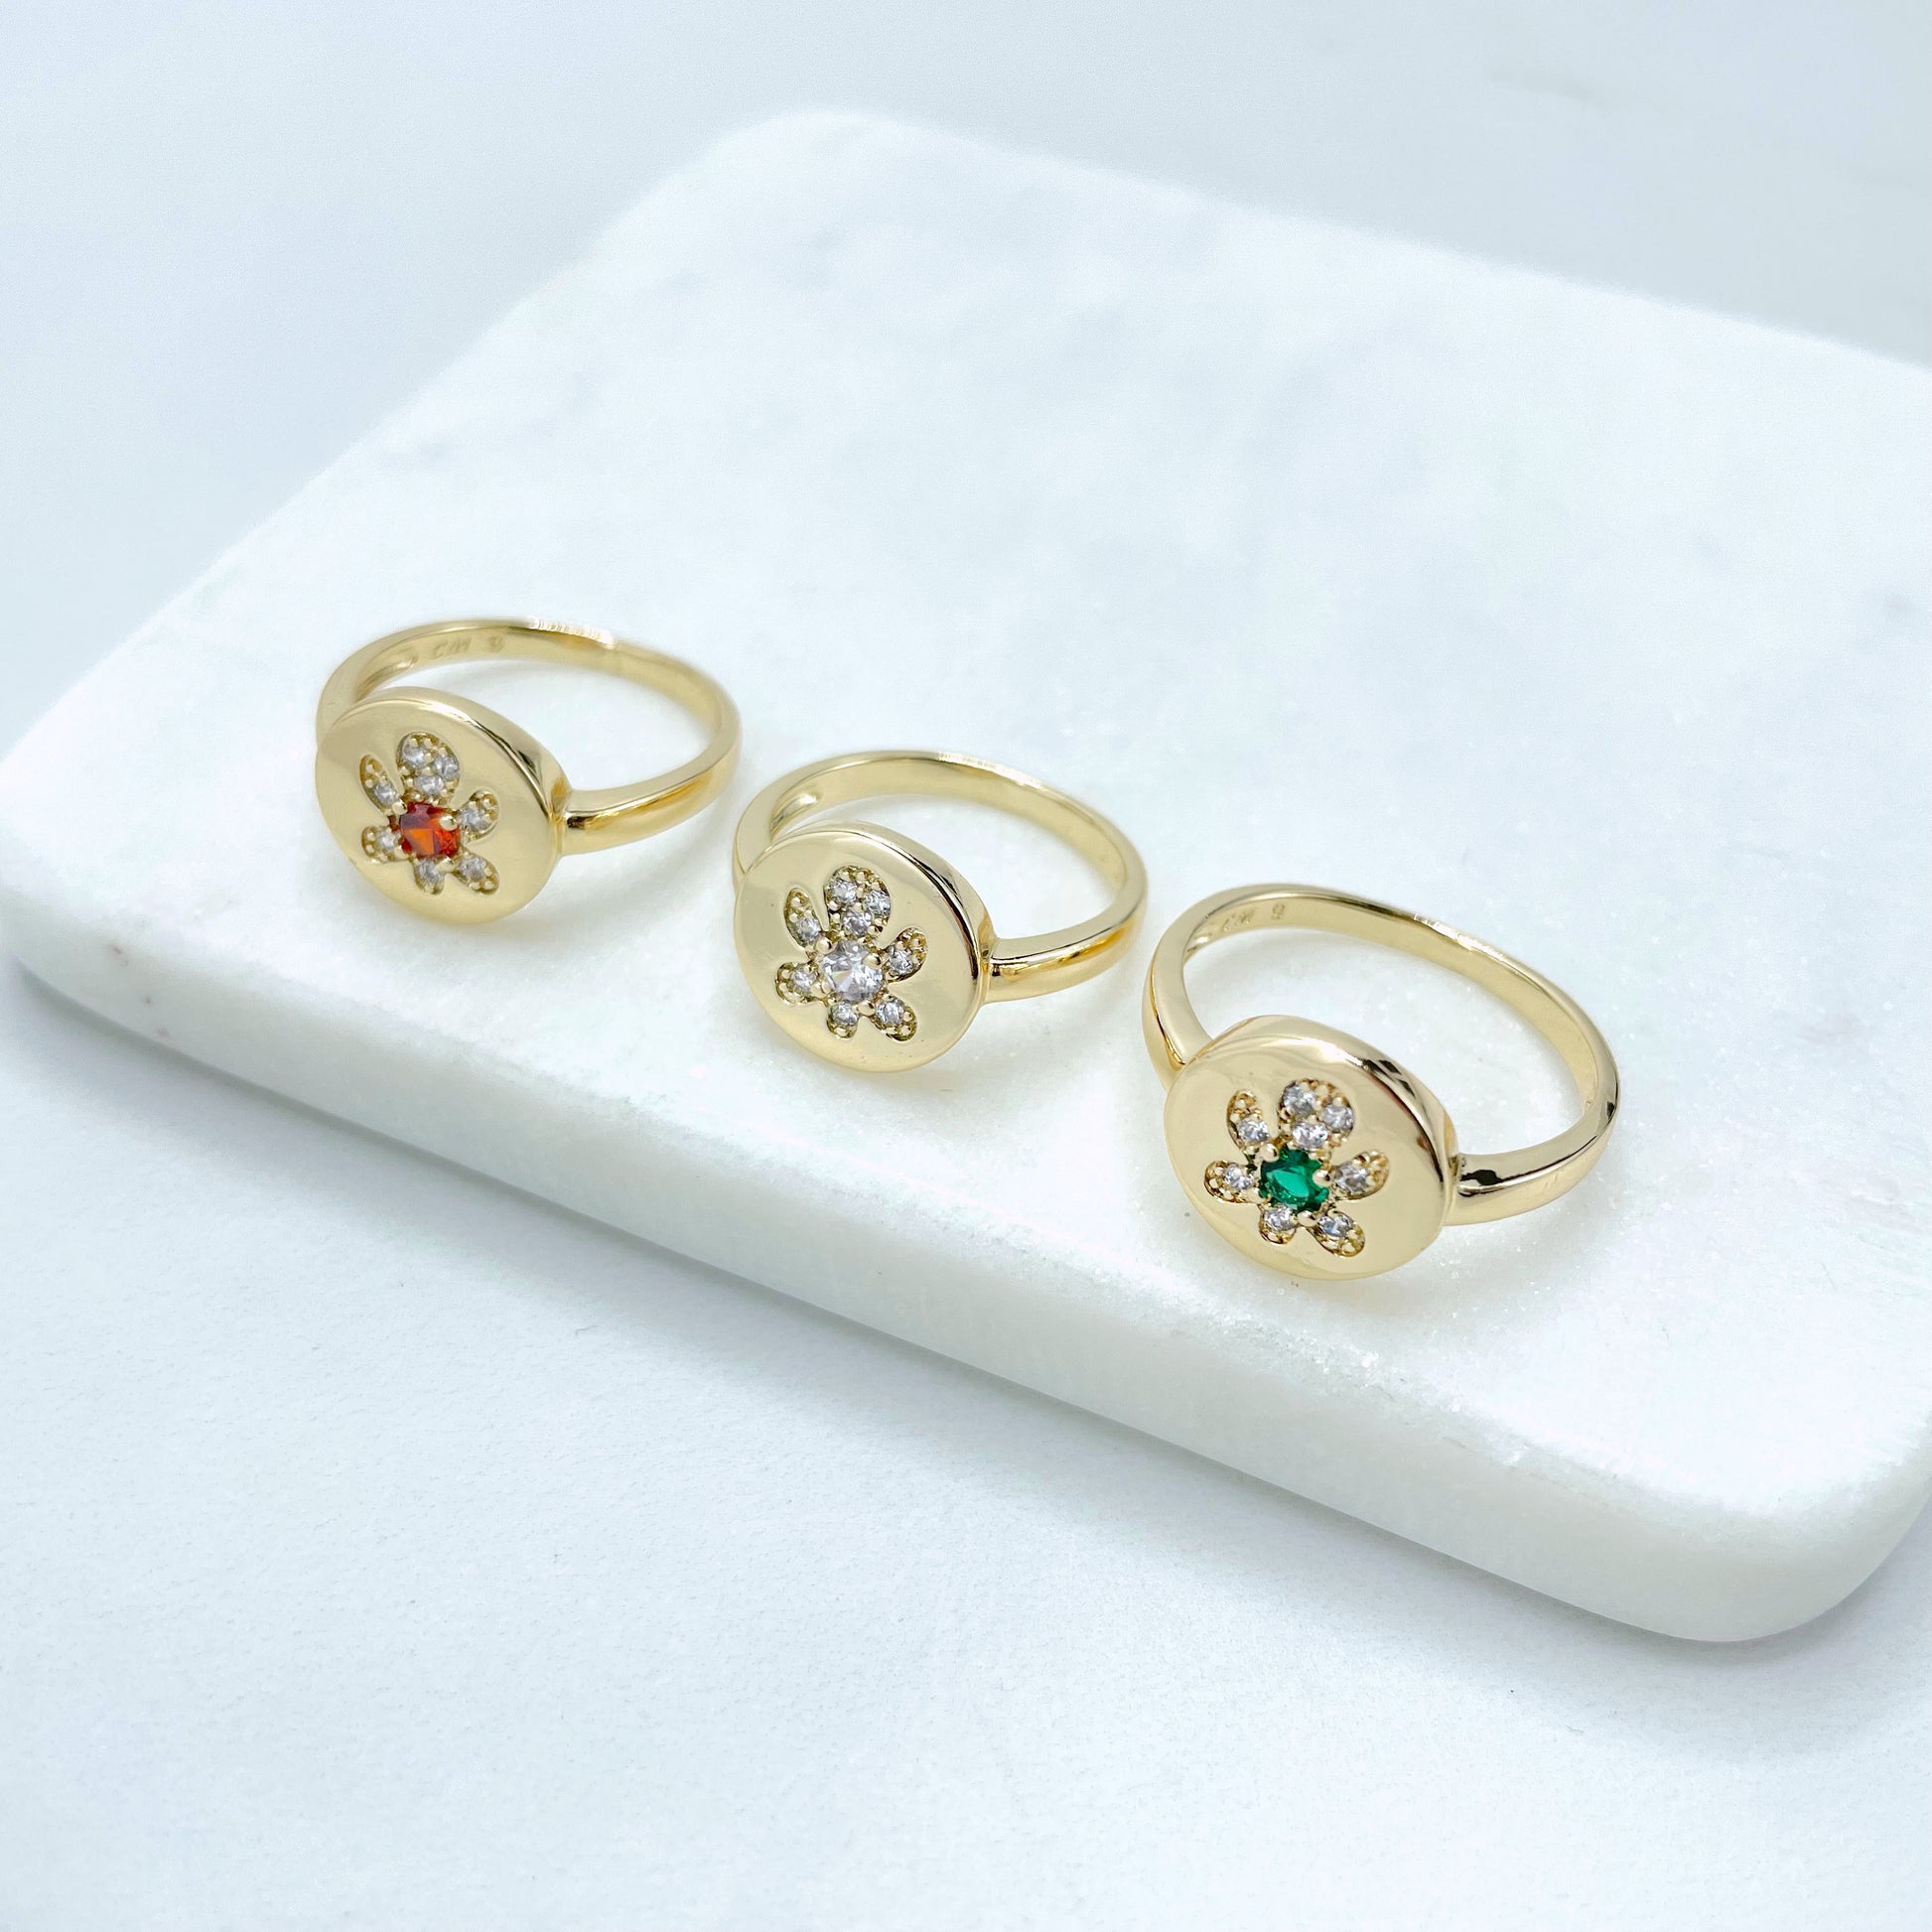 18k Gold Filled Clear Micro Cubic Zirconia in Flower Shape Design Ring with Green, Orange or Clear CZ, Wholesale Jewelry Making Supplies